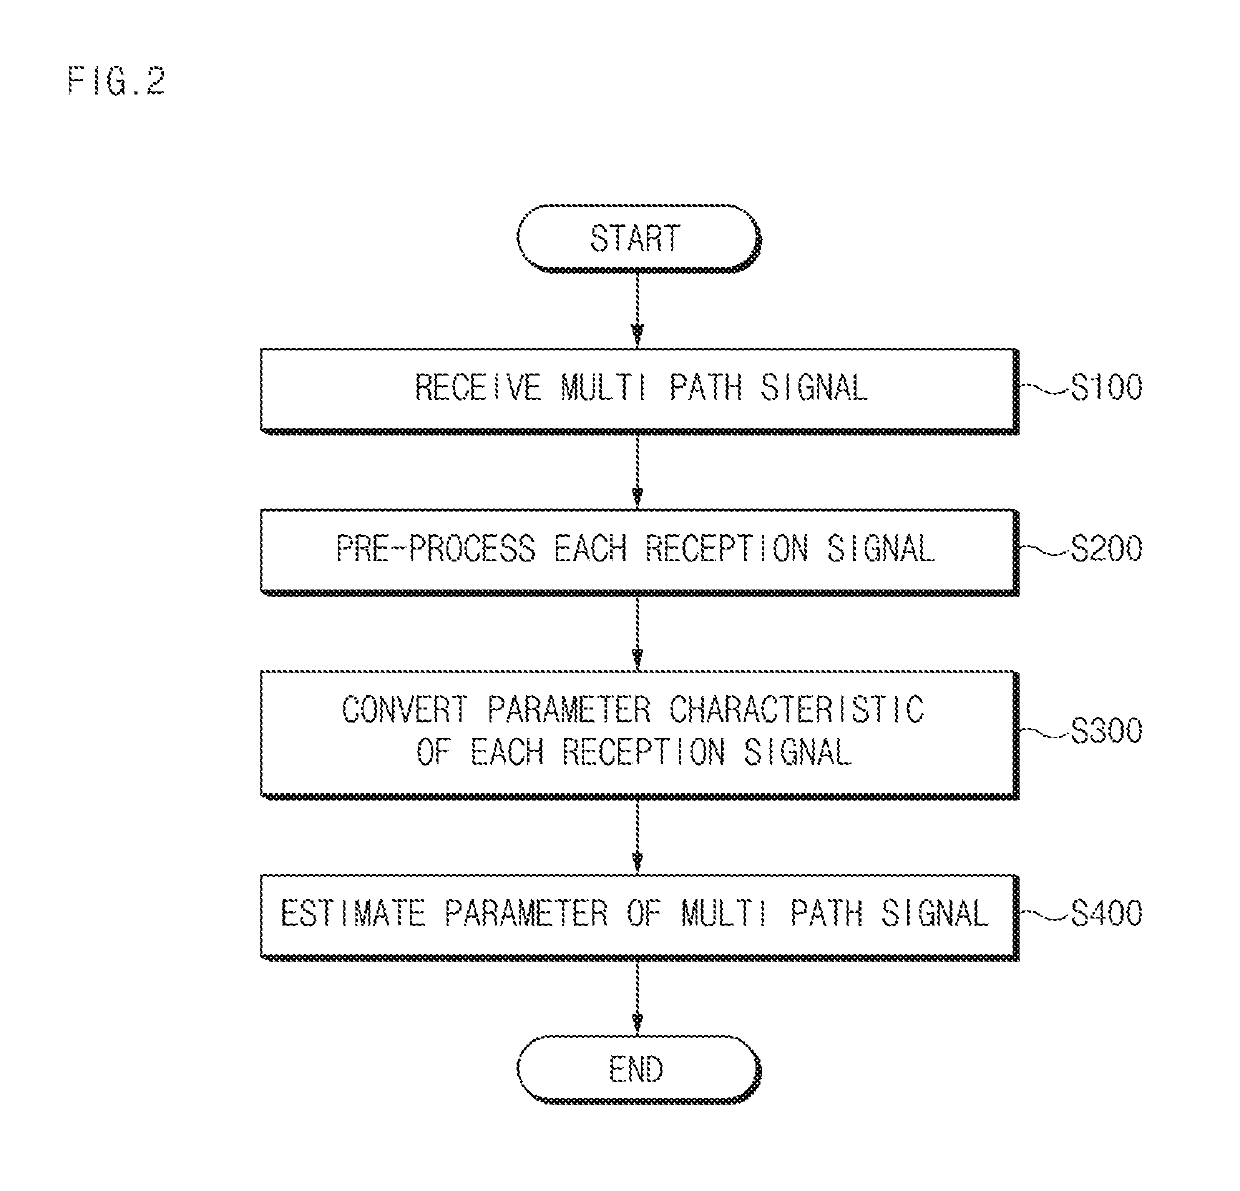 Apparatus and method for estimating parameter of multi path signal